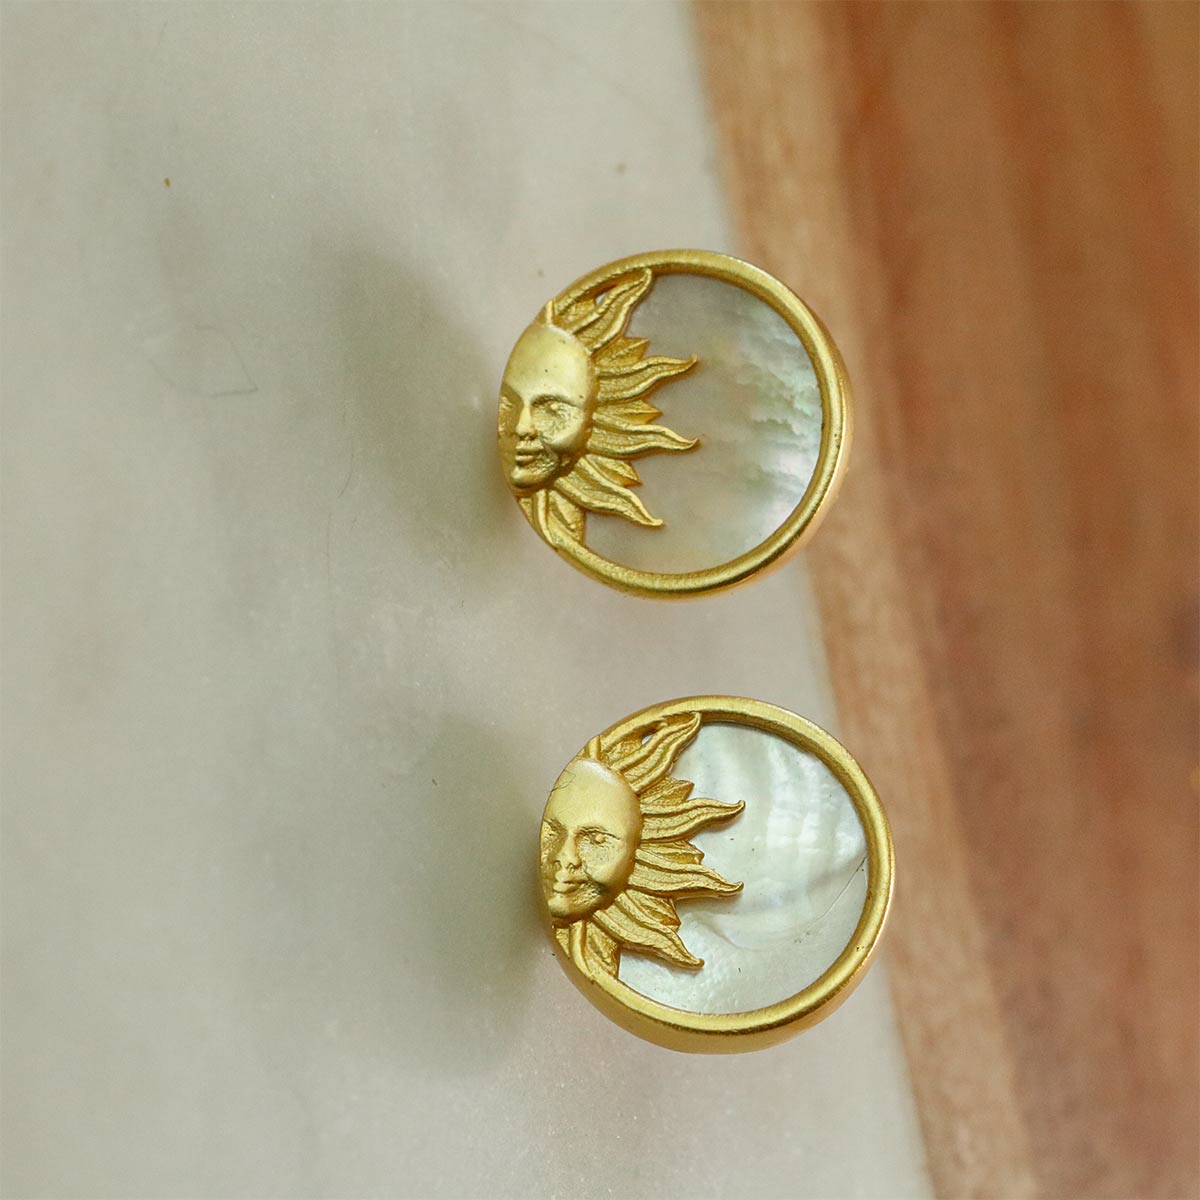 Sun earrings with Mother of Pearl